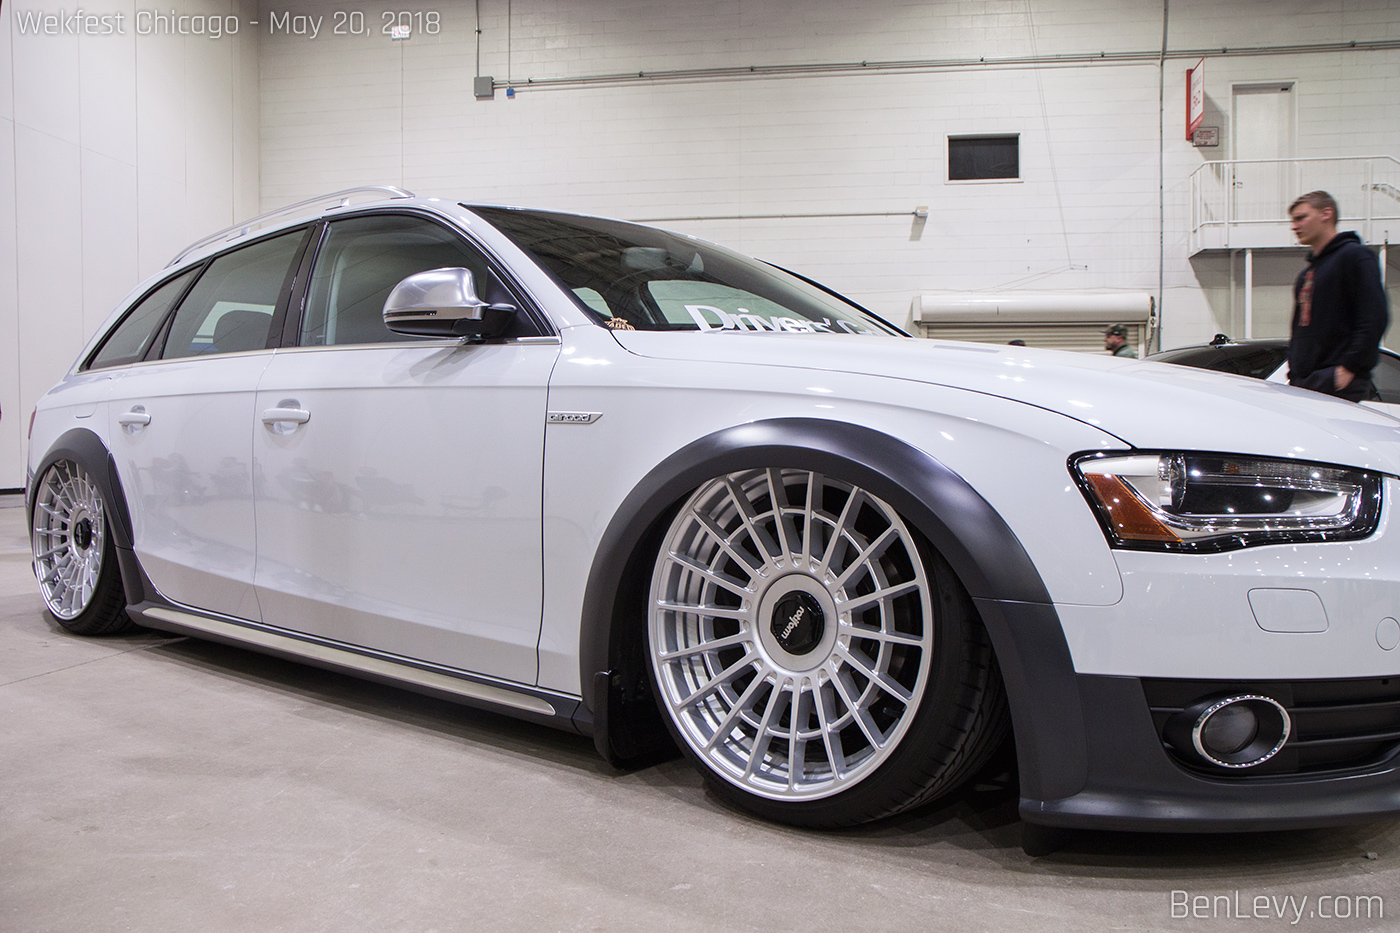 Dropped Audi Allroad at Wekfest